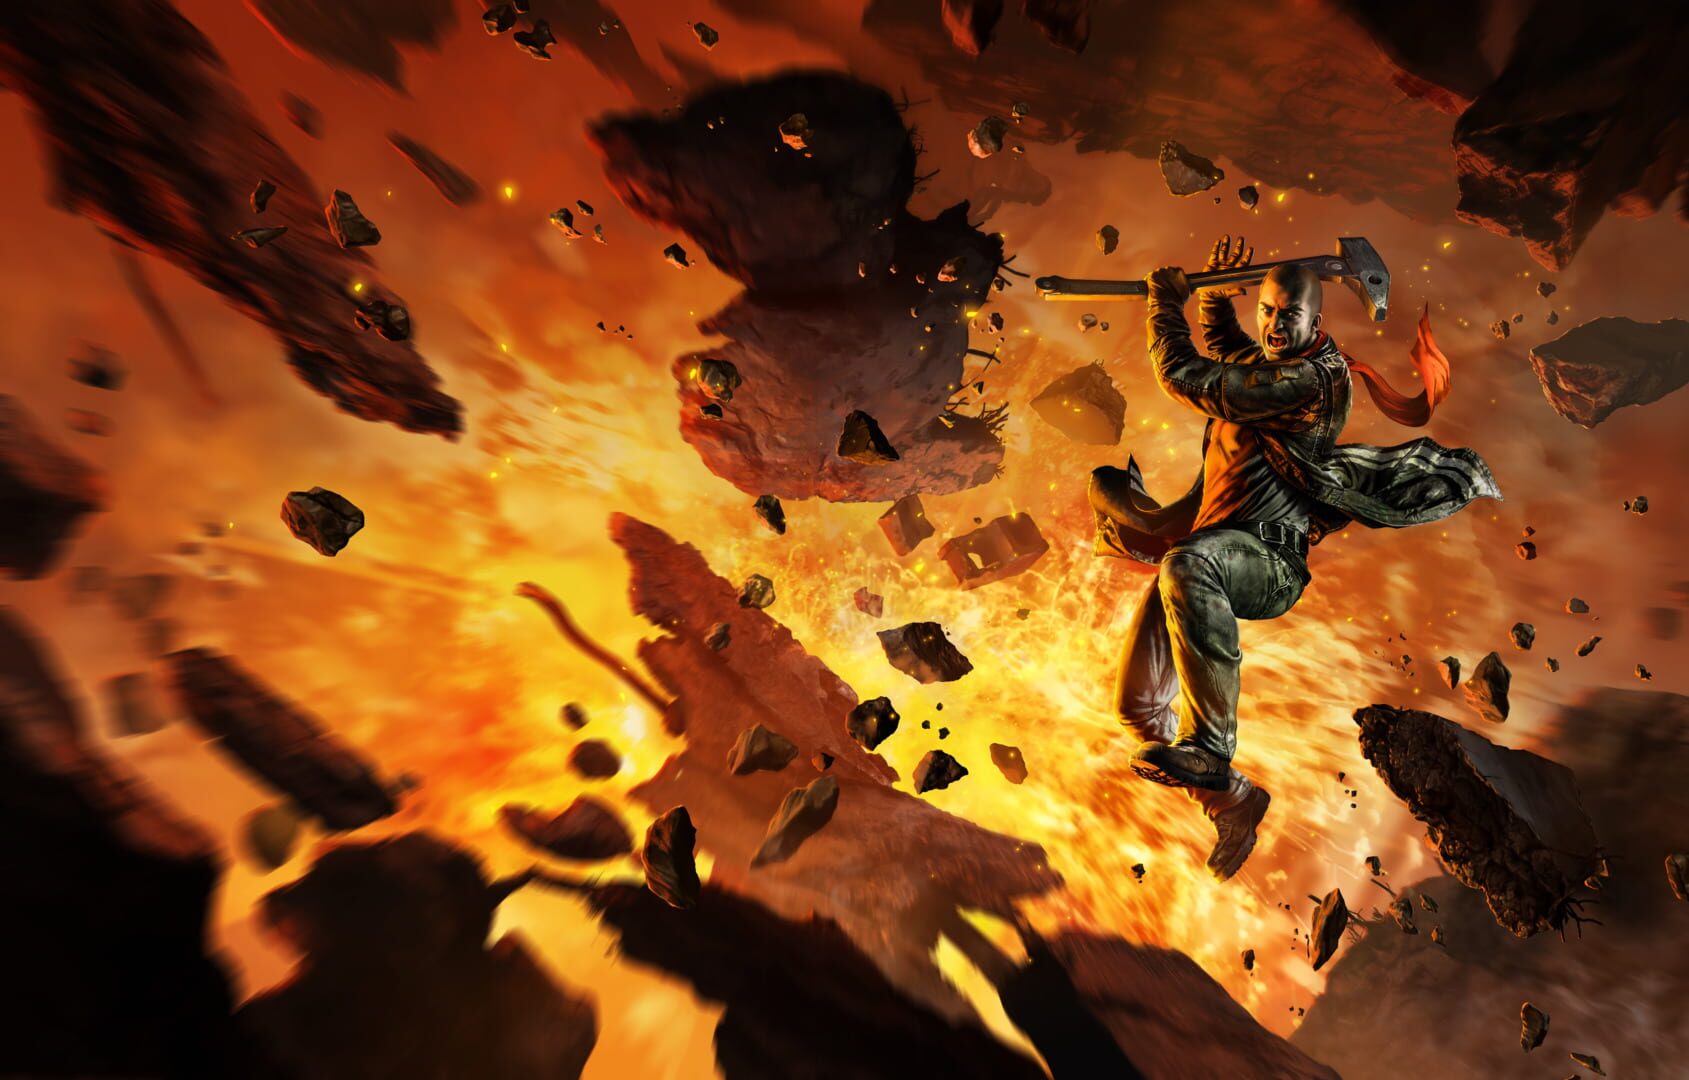 Artwork for Red Faction: Guerrilla Re-Mars-tered